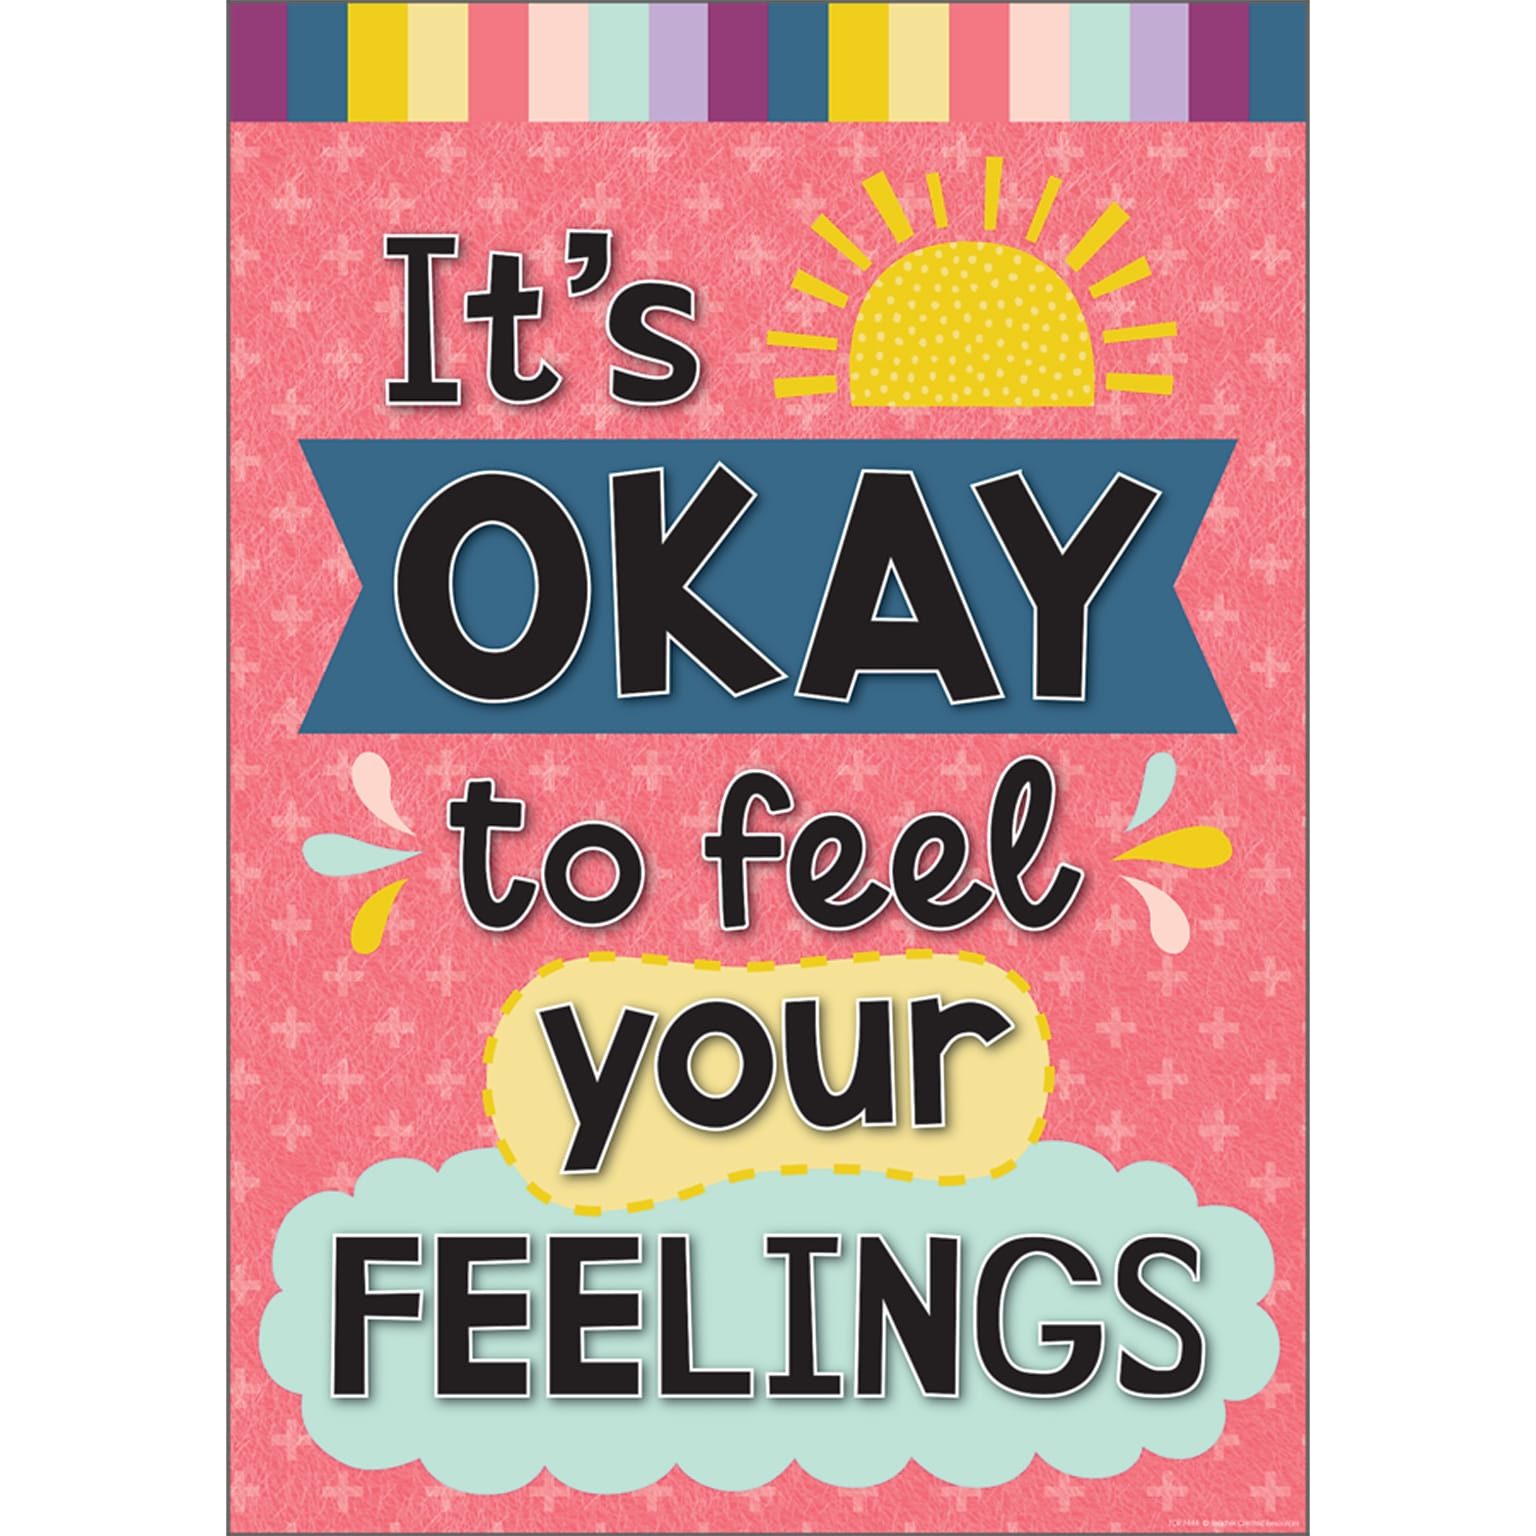 Teacher Created Resources 13-3/8 x 19 Its Okay to feel Your Feelings Positive Poster (TCR7444)